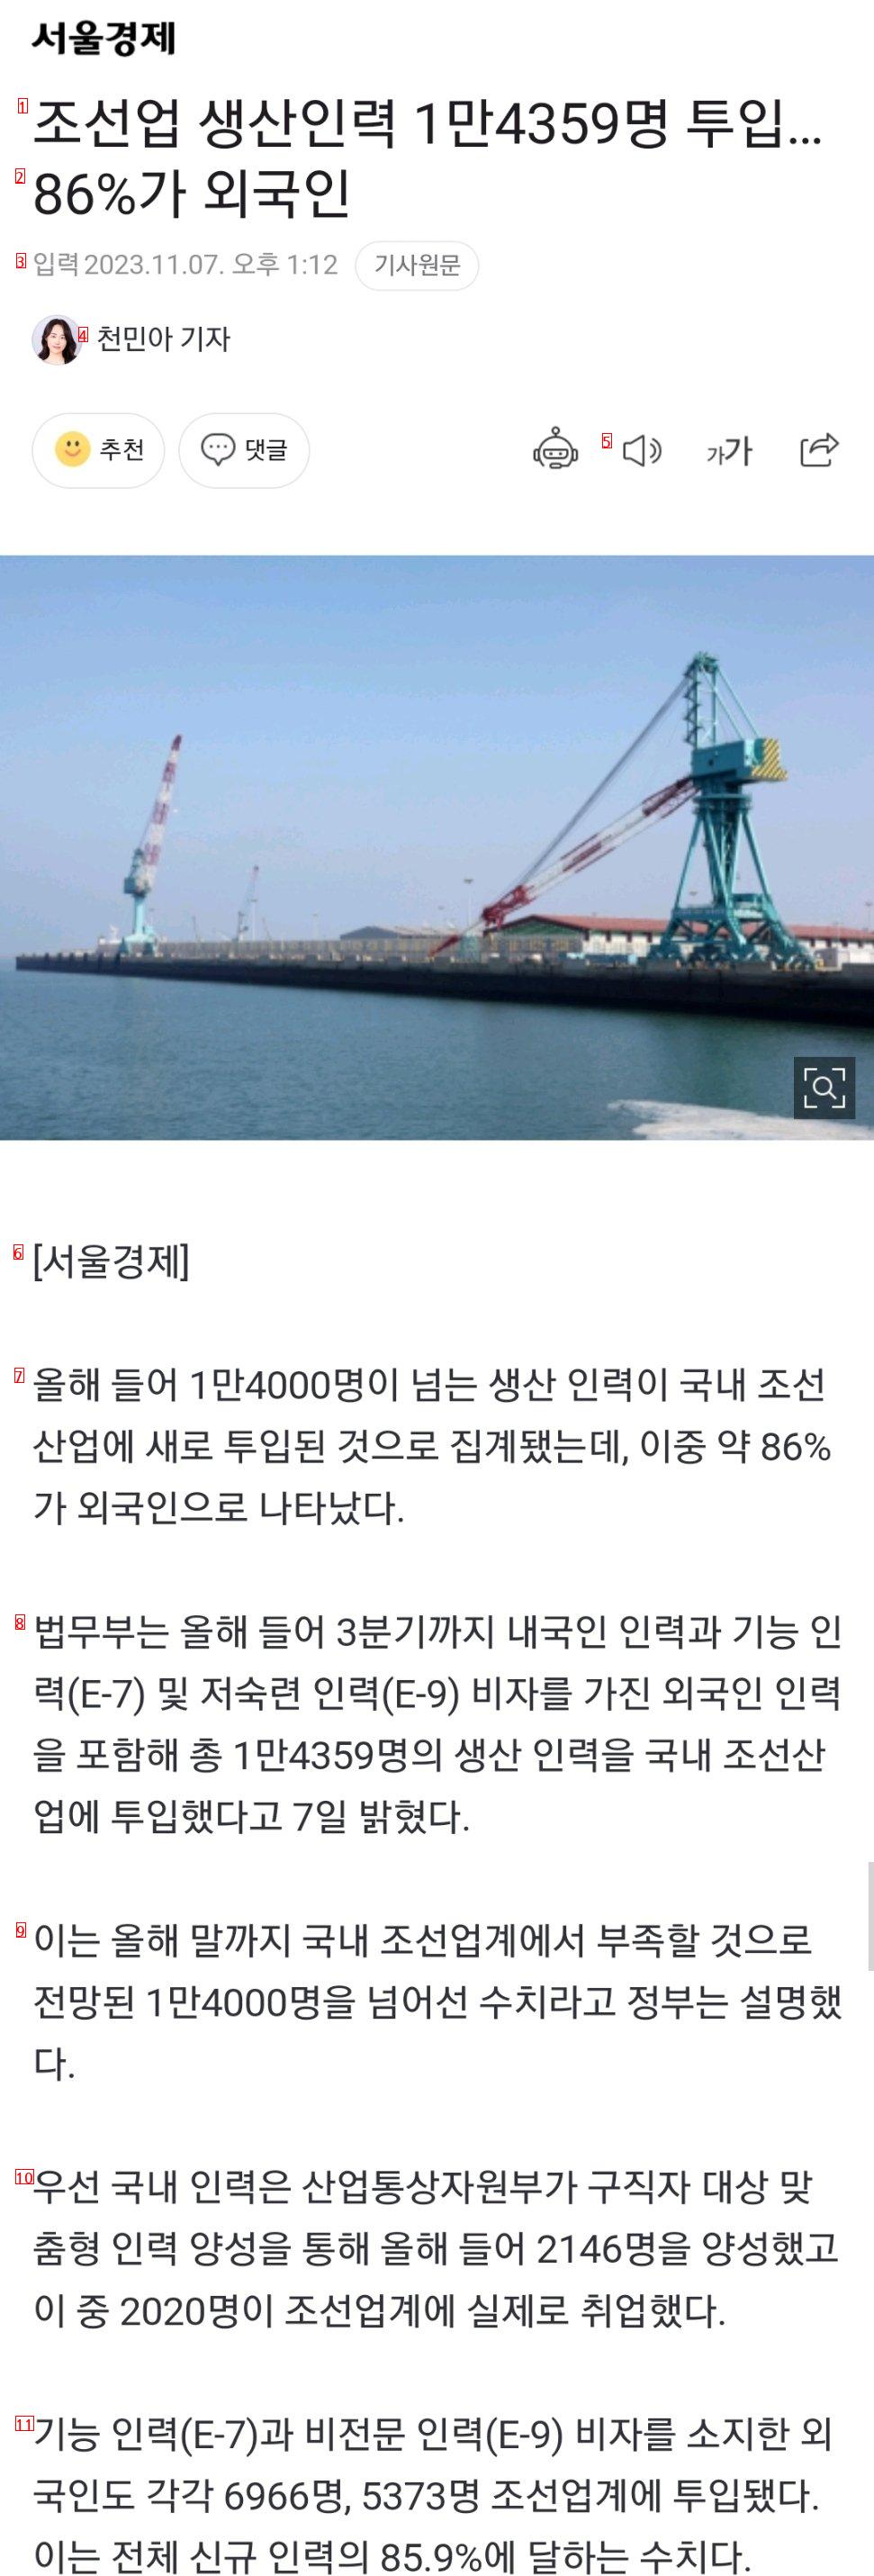 What's up with the shipyard in Korea? JPG